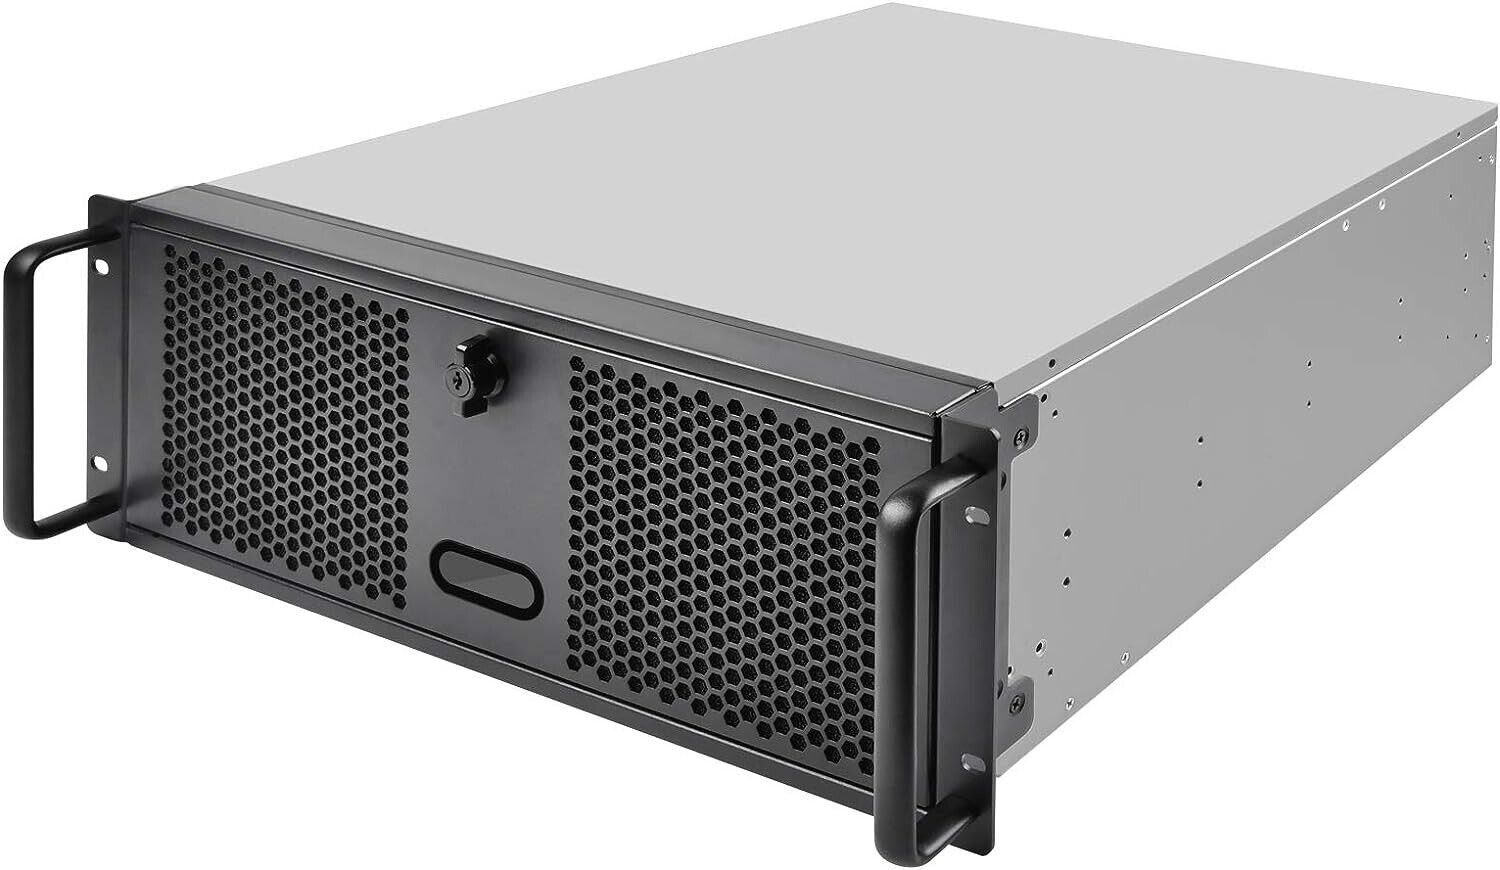 SilverStone Technology 4U Rackmount Server Chassis with 3 X 5.25 Front Bays